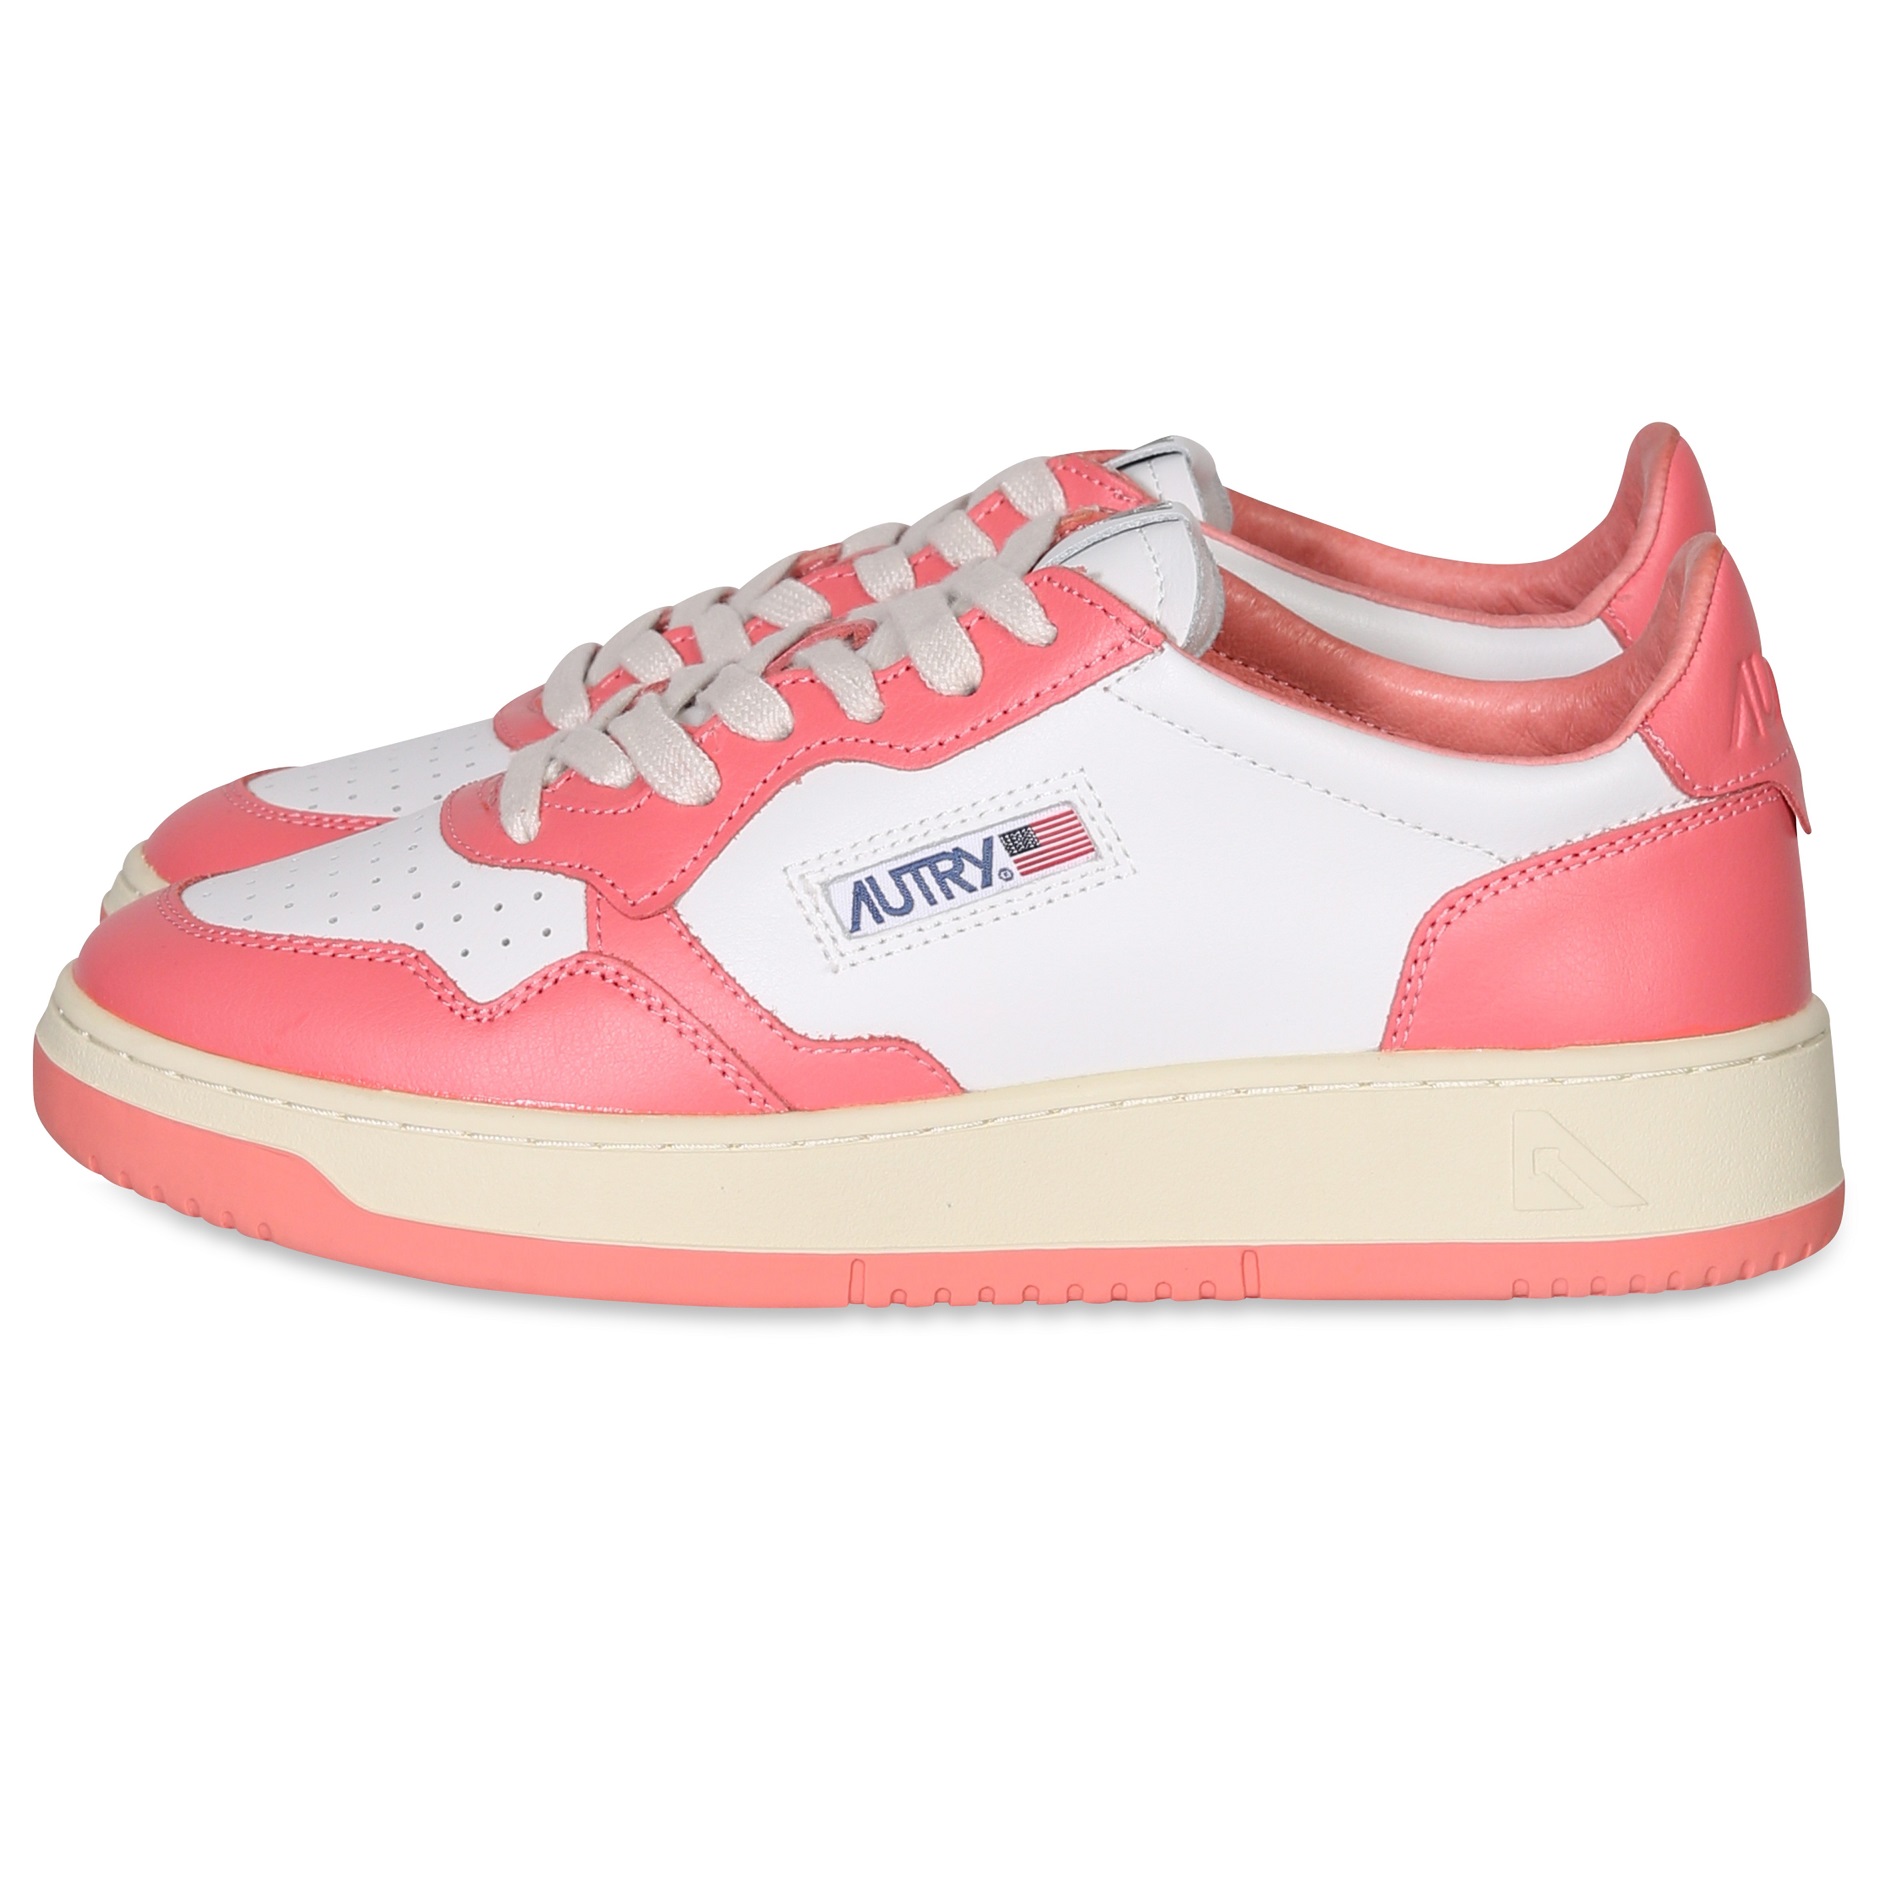 AUTRY ACTION SHOES Low Sneaker White/Lobster